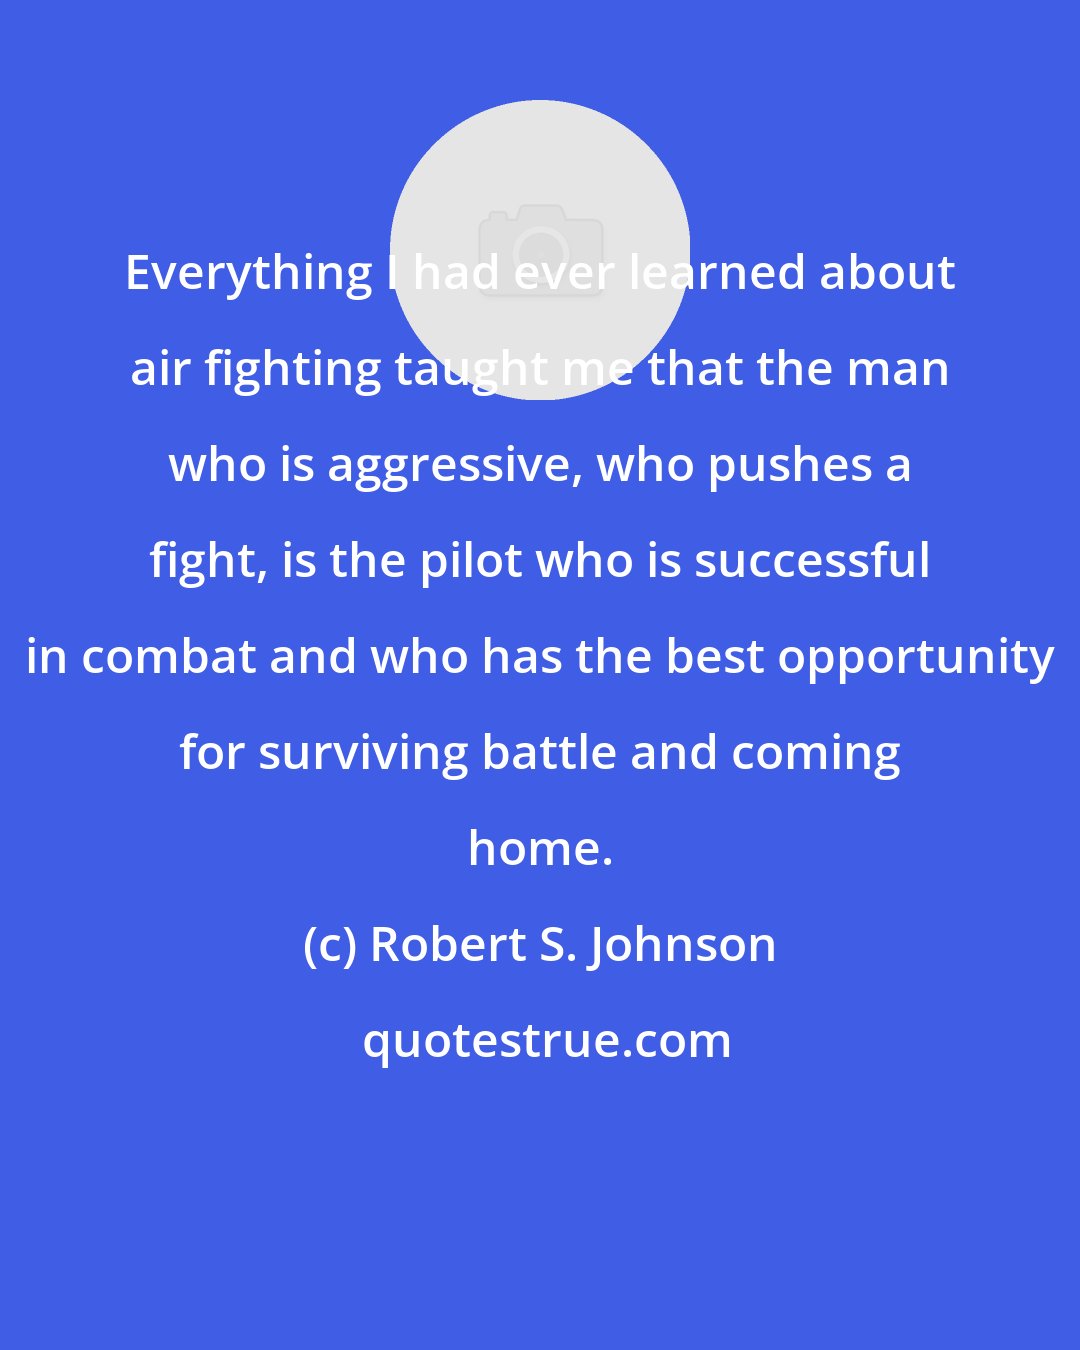 Robert S. Johnson: Everything I had ever learned about air fighting taught me that the man who is aggressive, who pushes a fight, is the pilot who is successful in combat and who has the best opportunity for surviving battle and coming home.